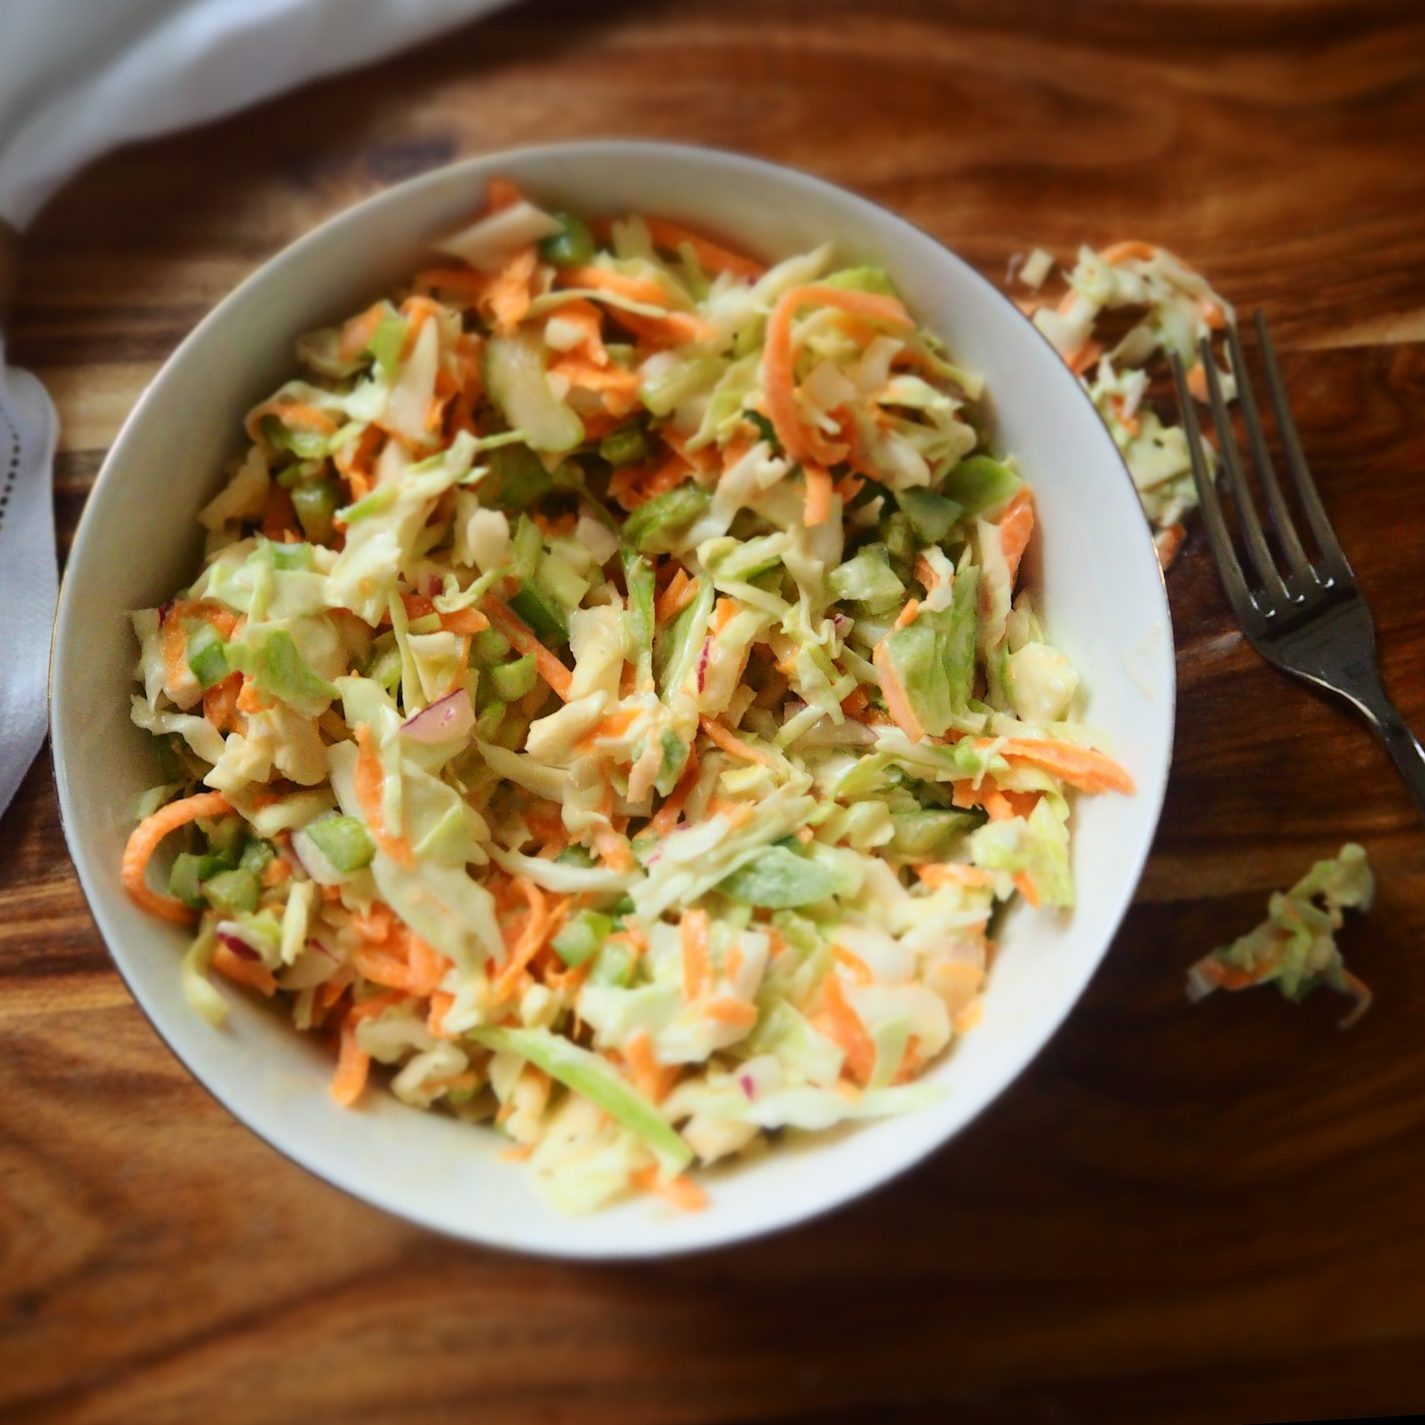 Top-down view of a white bowl containing cole slaw with zucchini